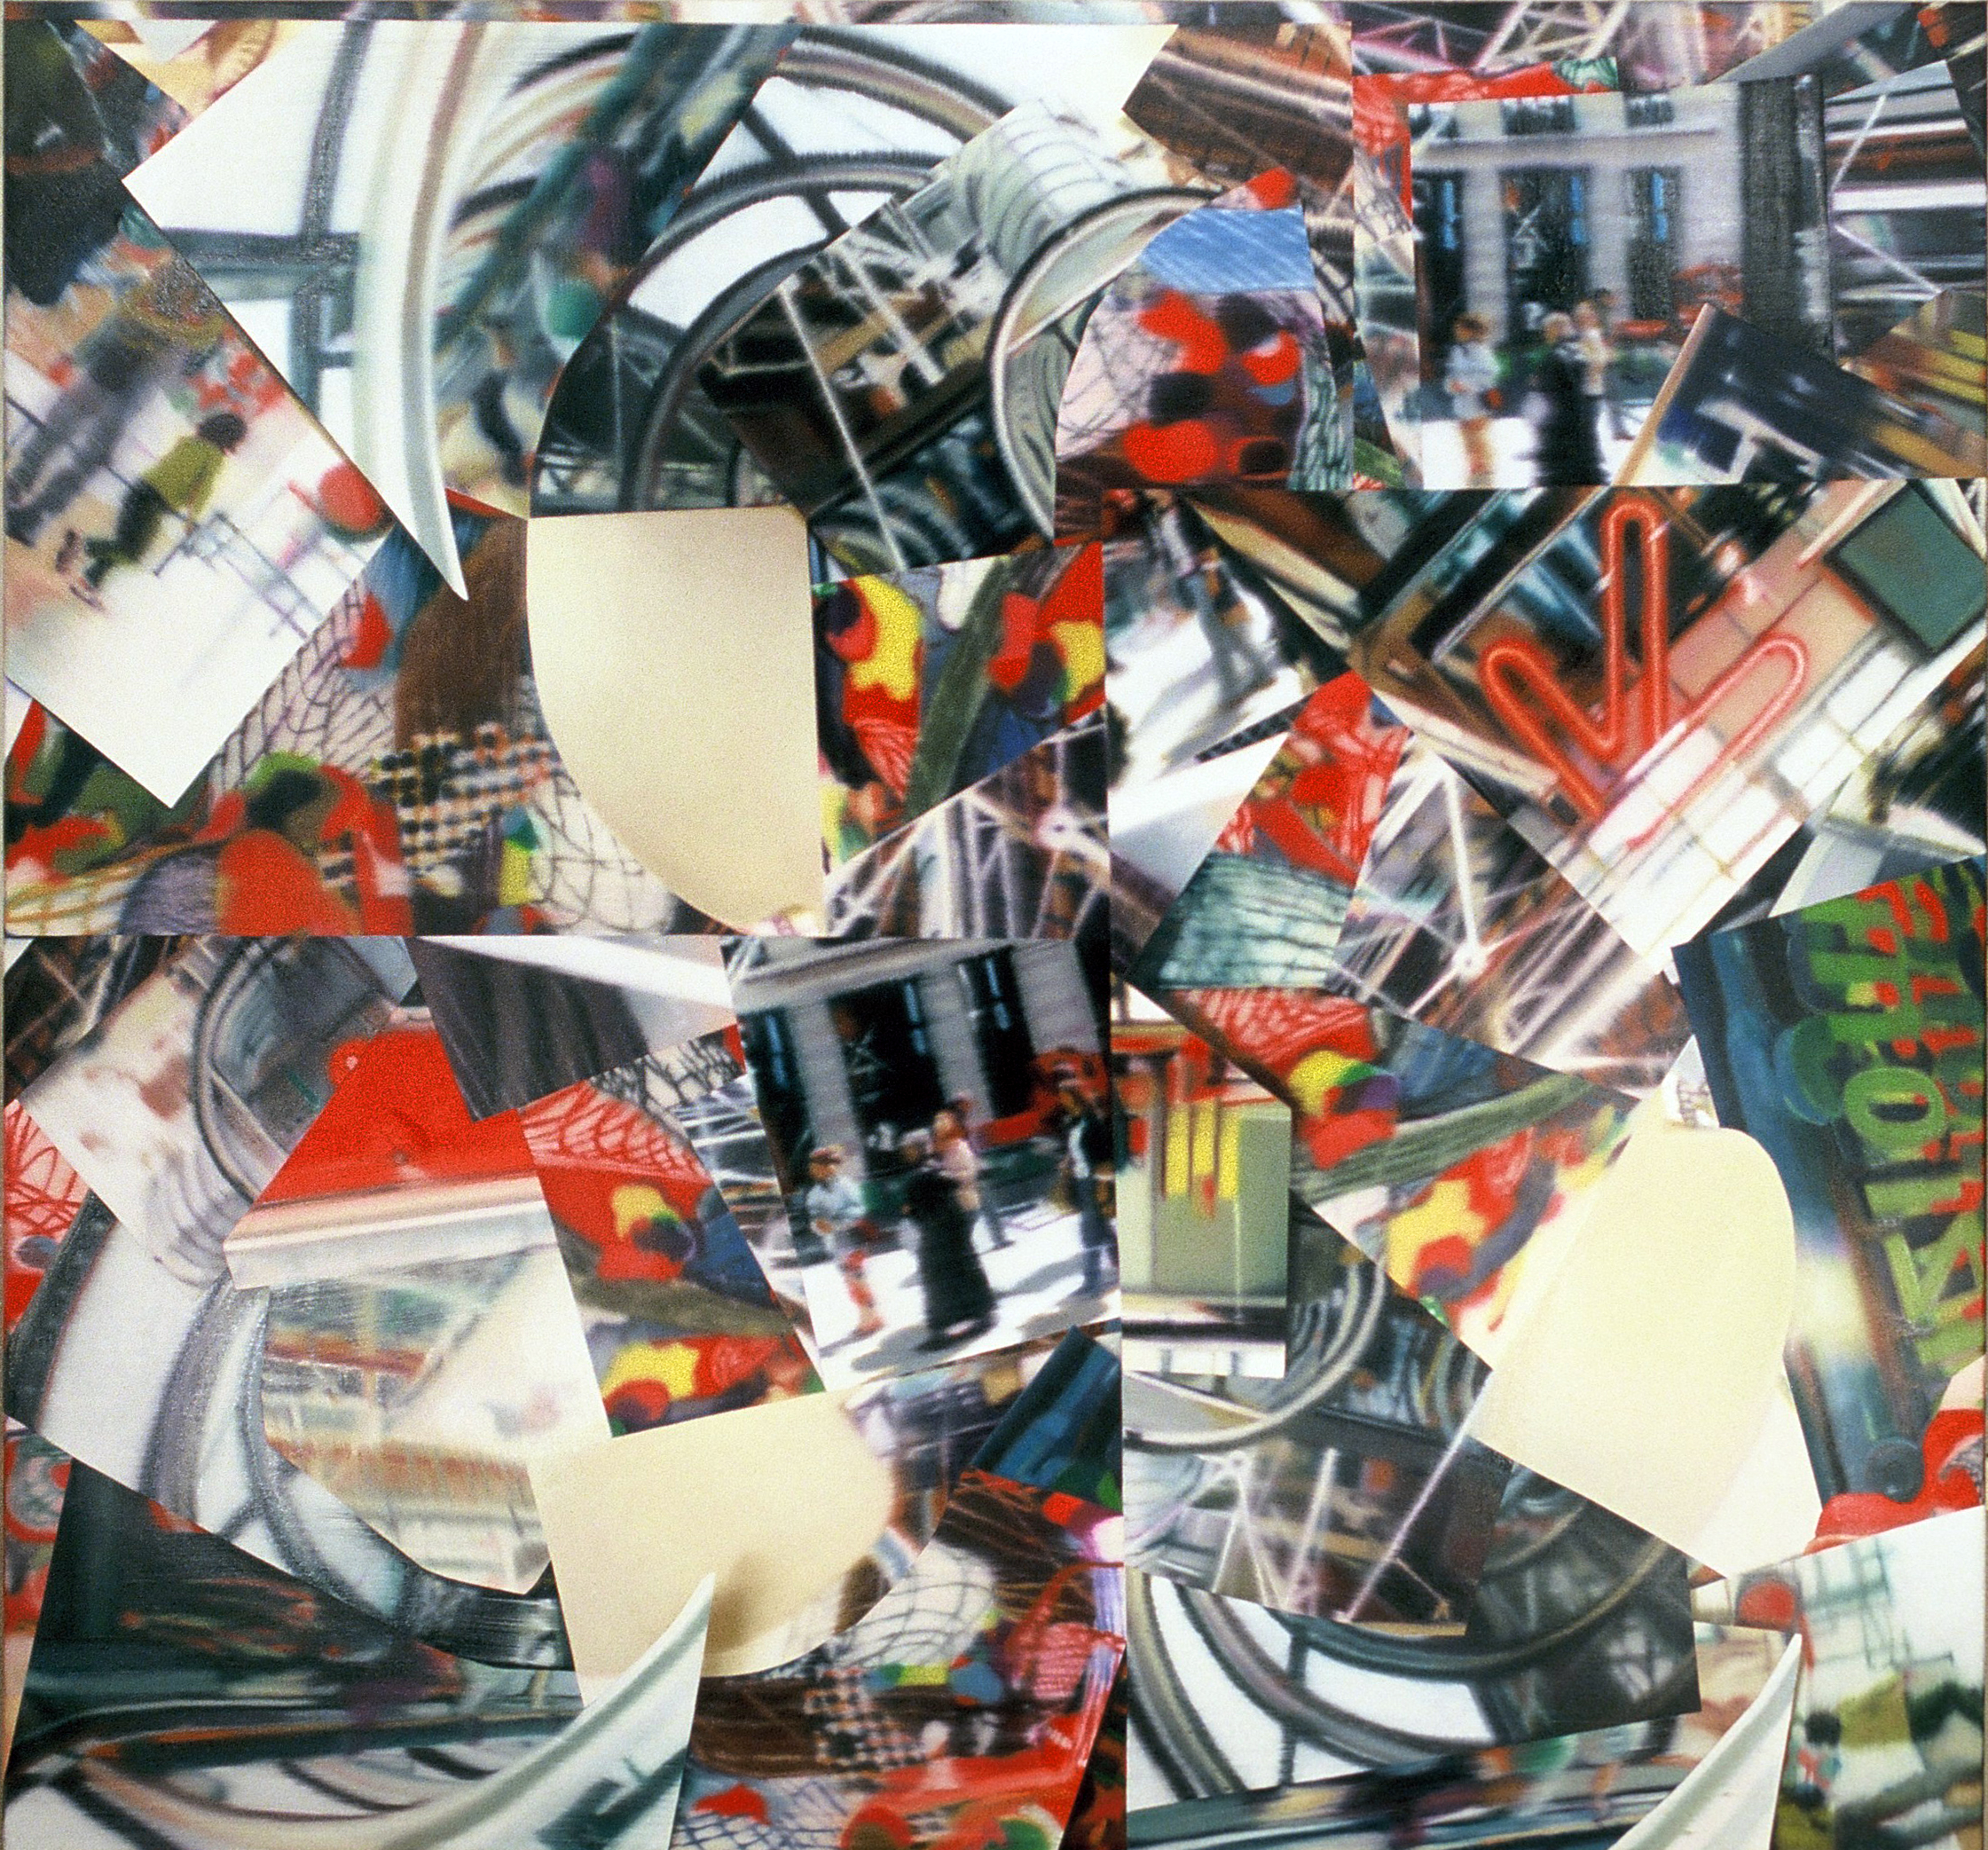   Untitled (Expo) , 2003, oil on canvas, 157 x 190cm, Private collection, France 